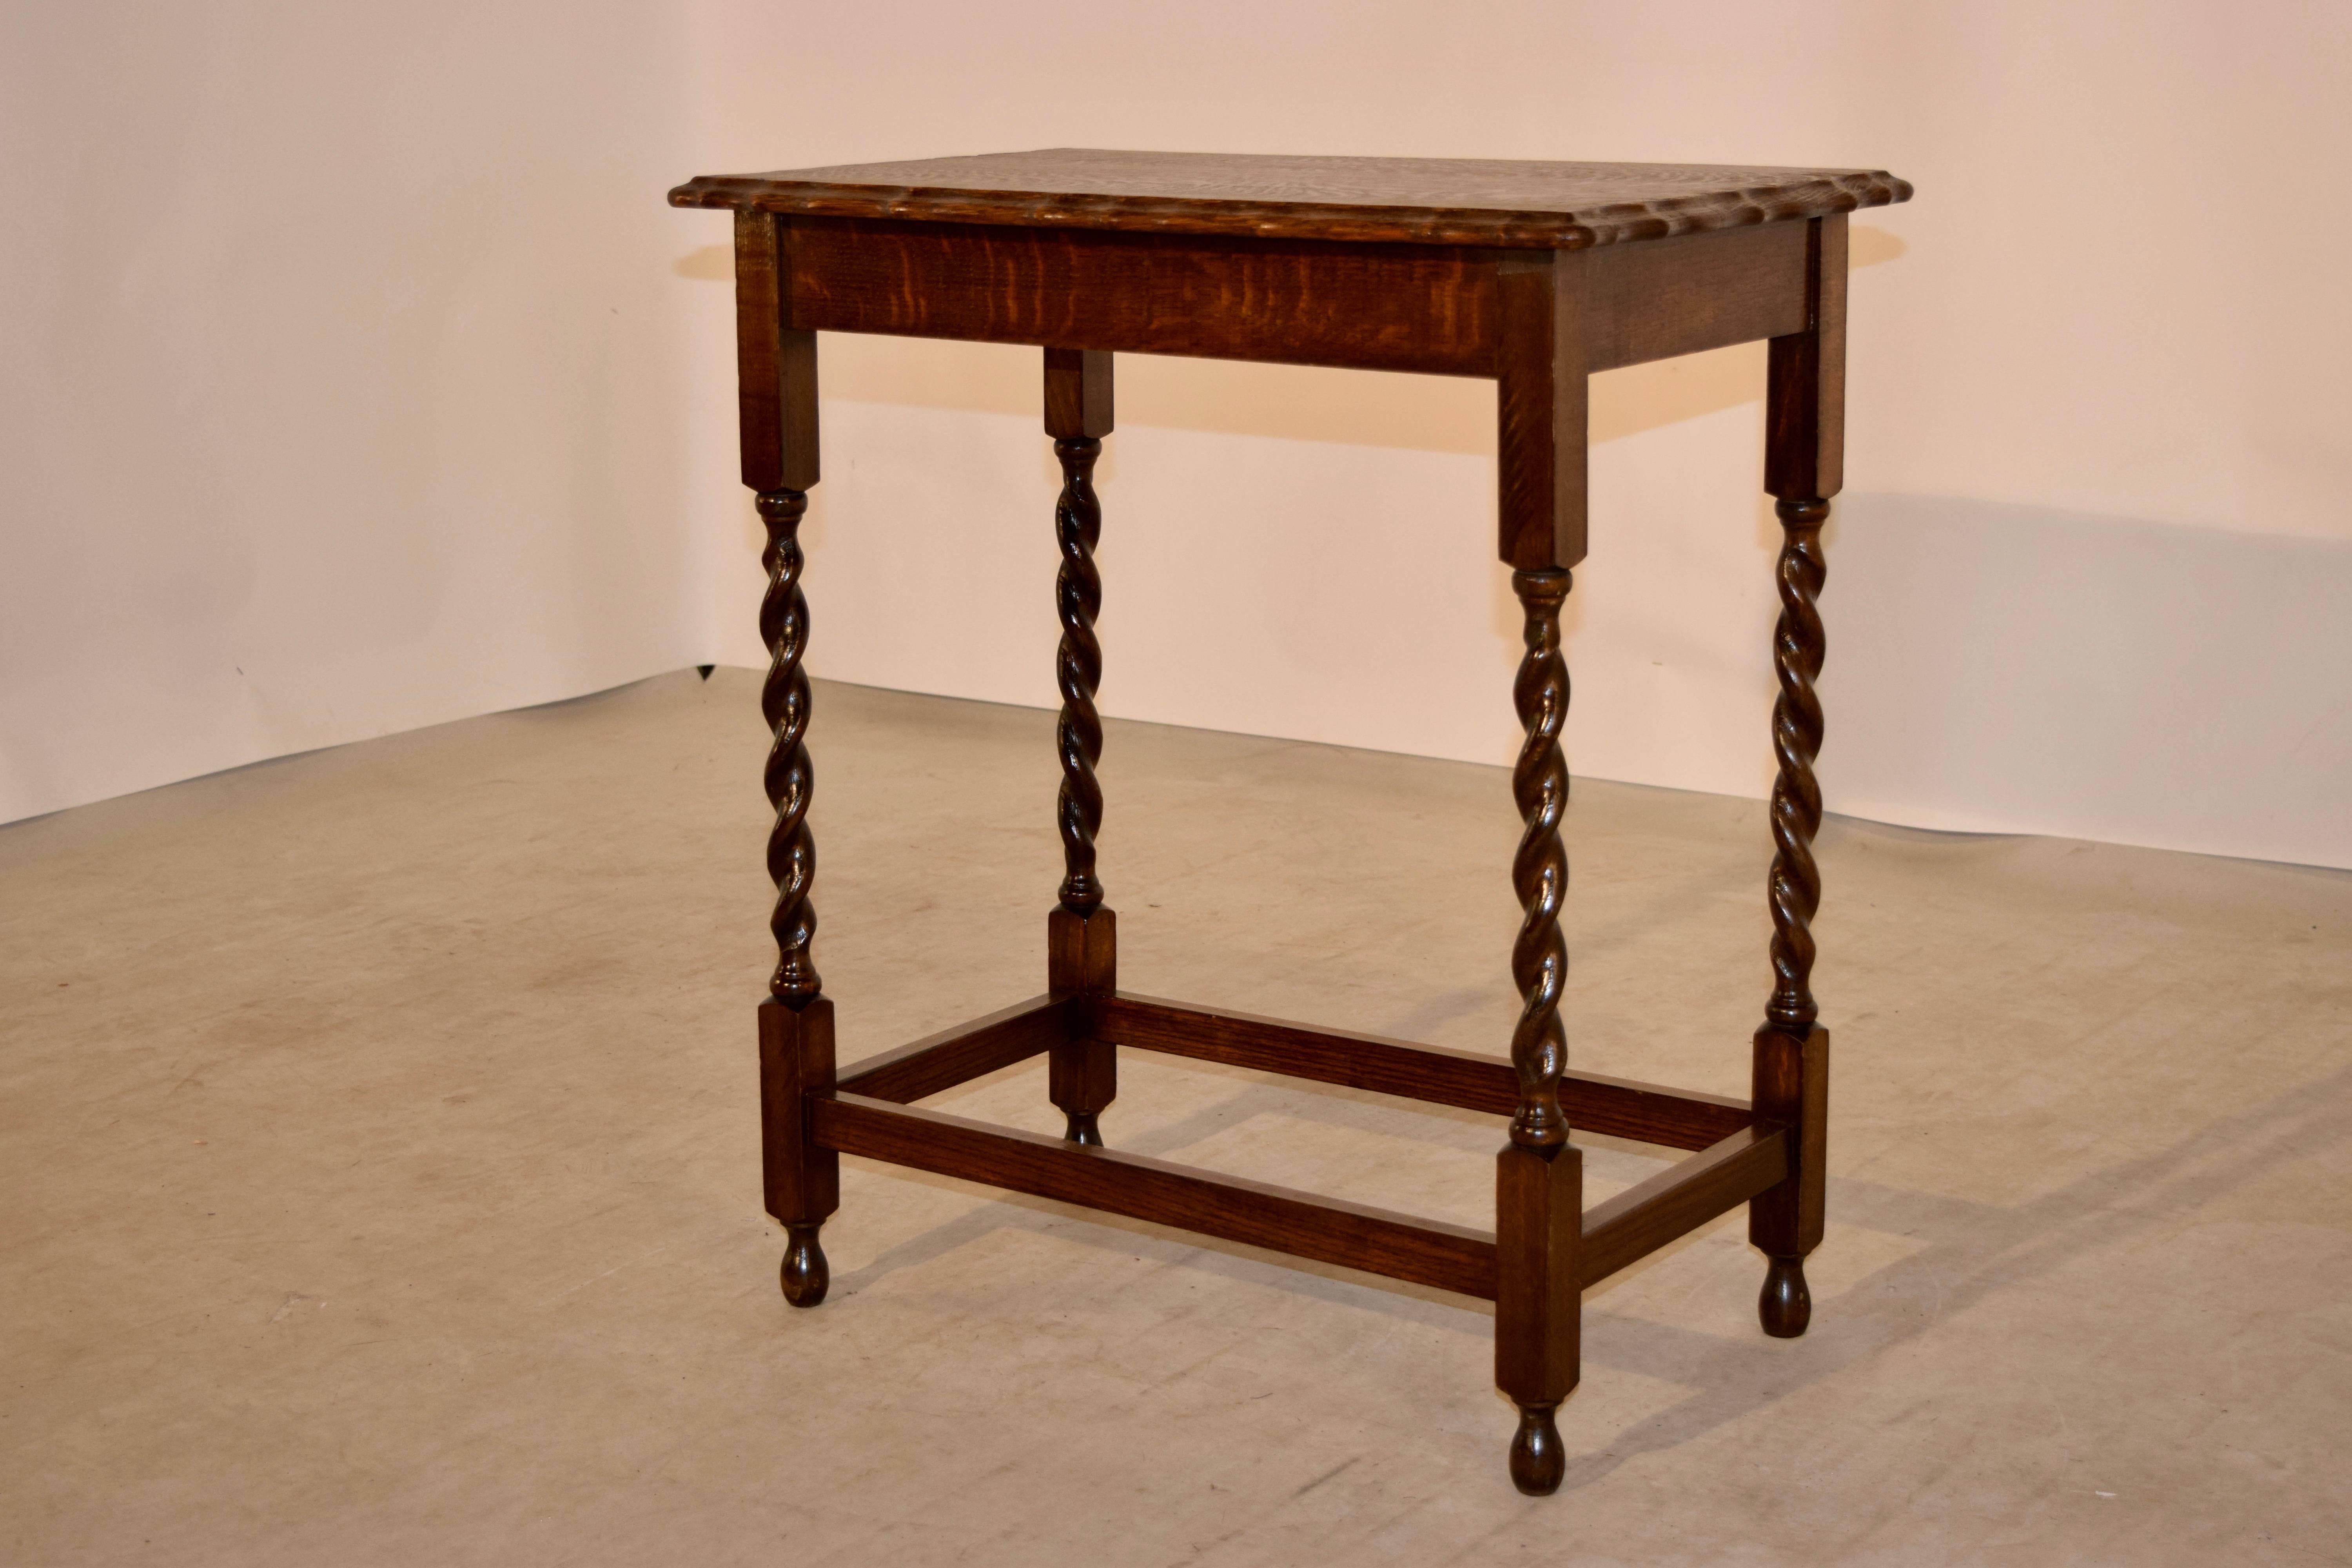 English oak side table with a rectangular shaped top which has a double beveled and scalloped edge following down to a simple apron and hand-turned barley twist legs, joined by simple stretchers. Raised on hand-turned feet.